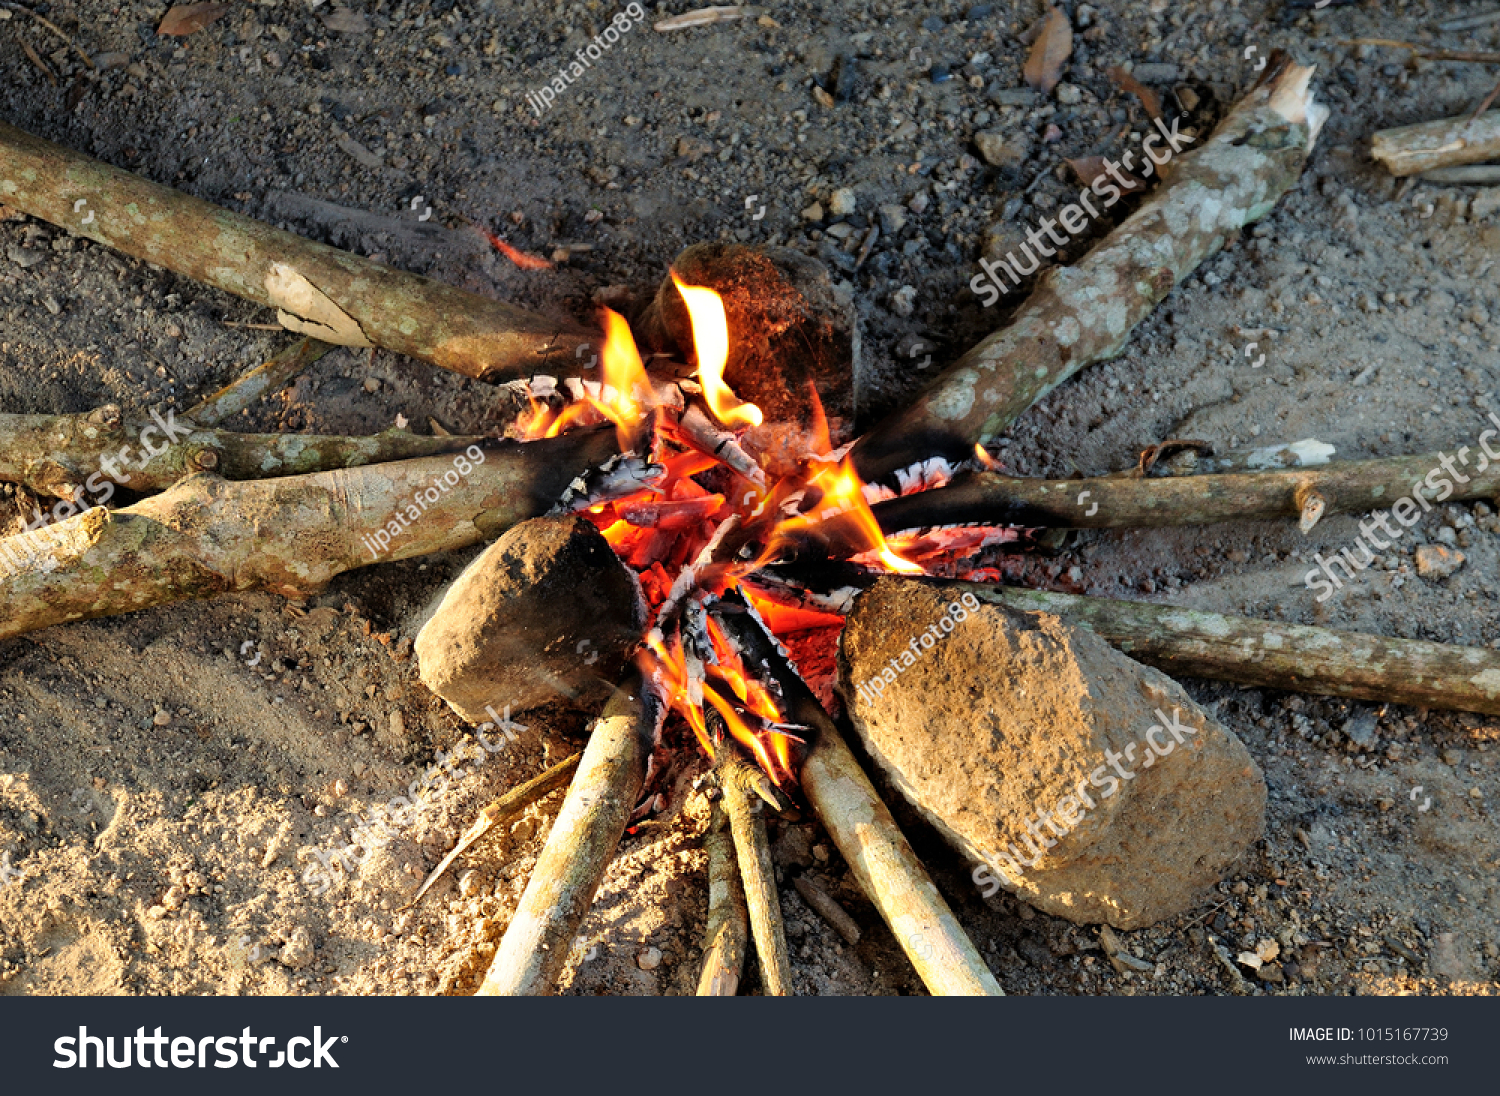 Use Wood Stove Cooking Rice Outback Stock Photo Edit Now 1015167739